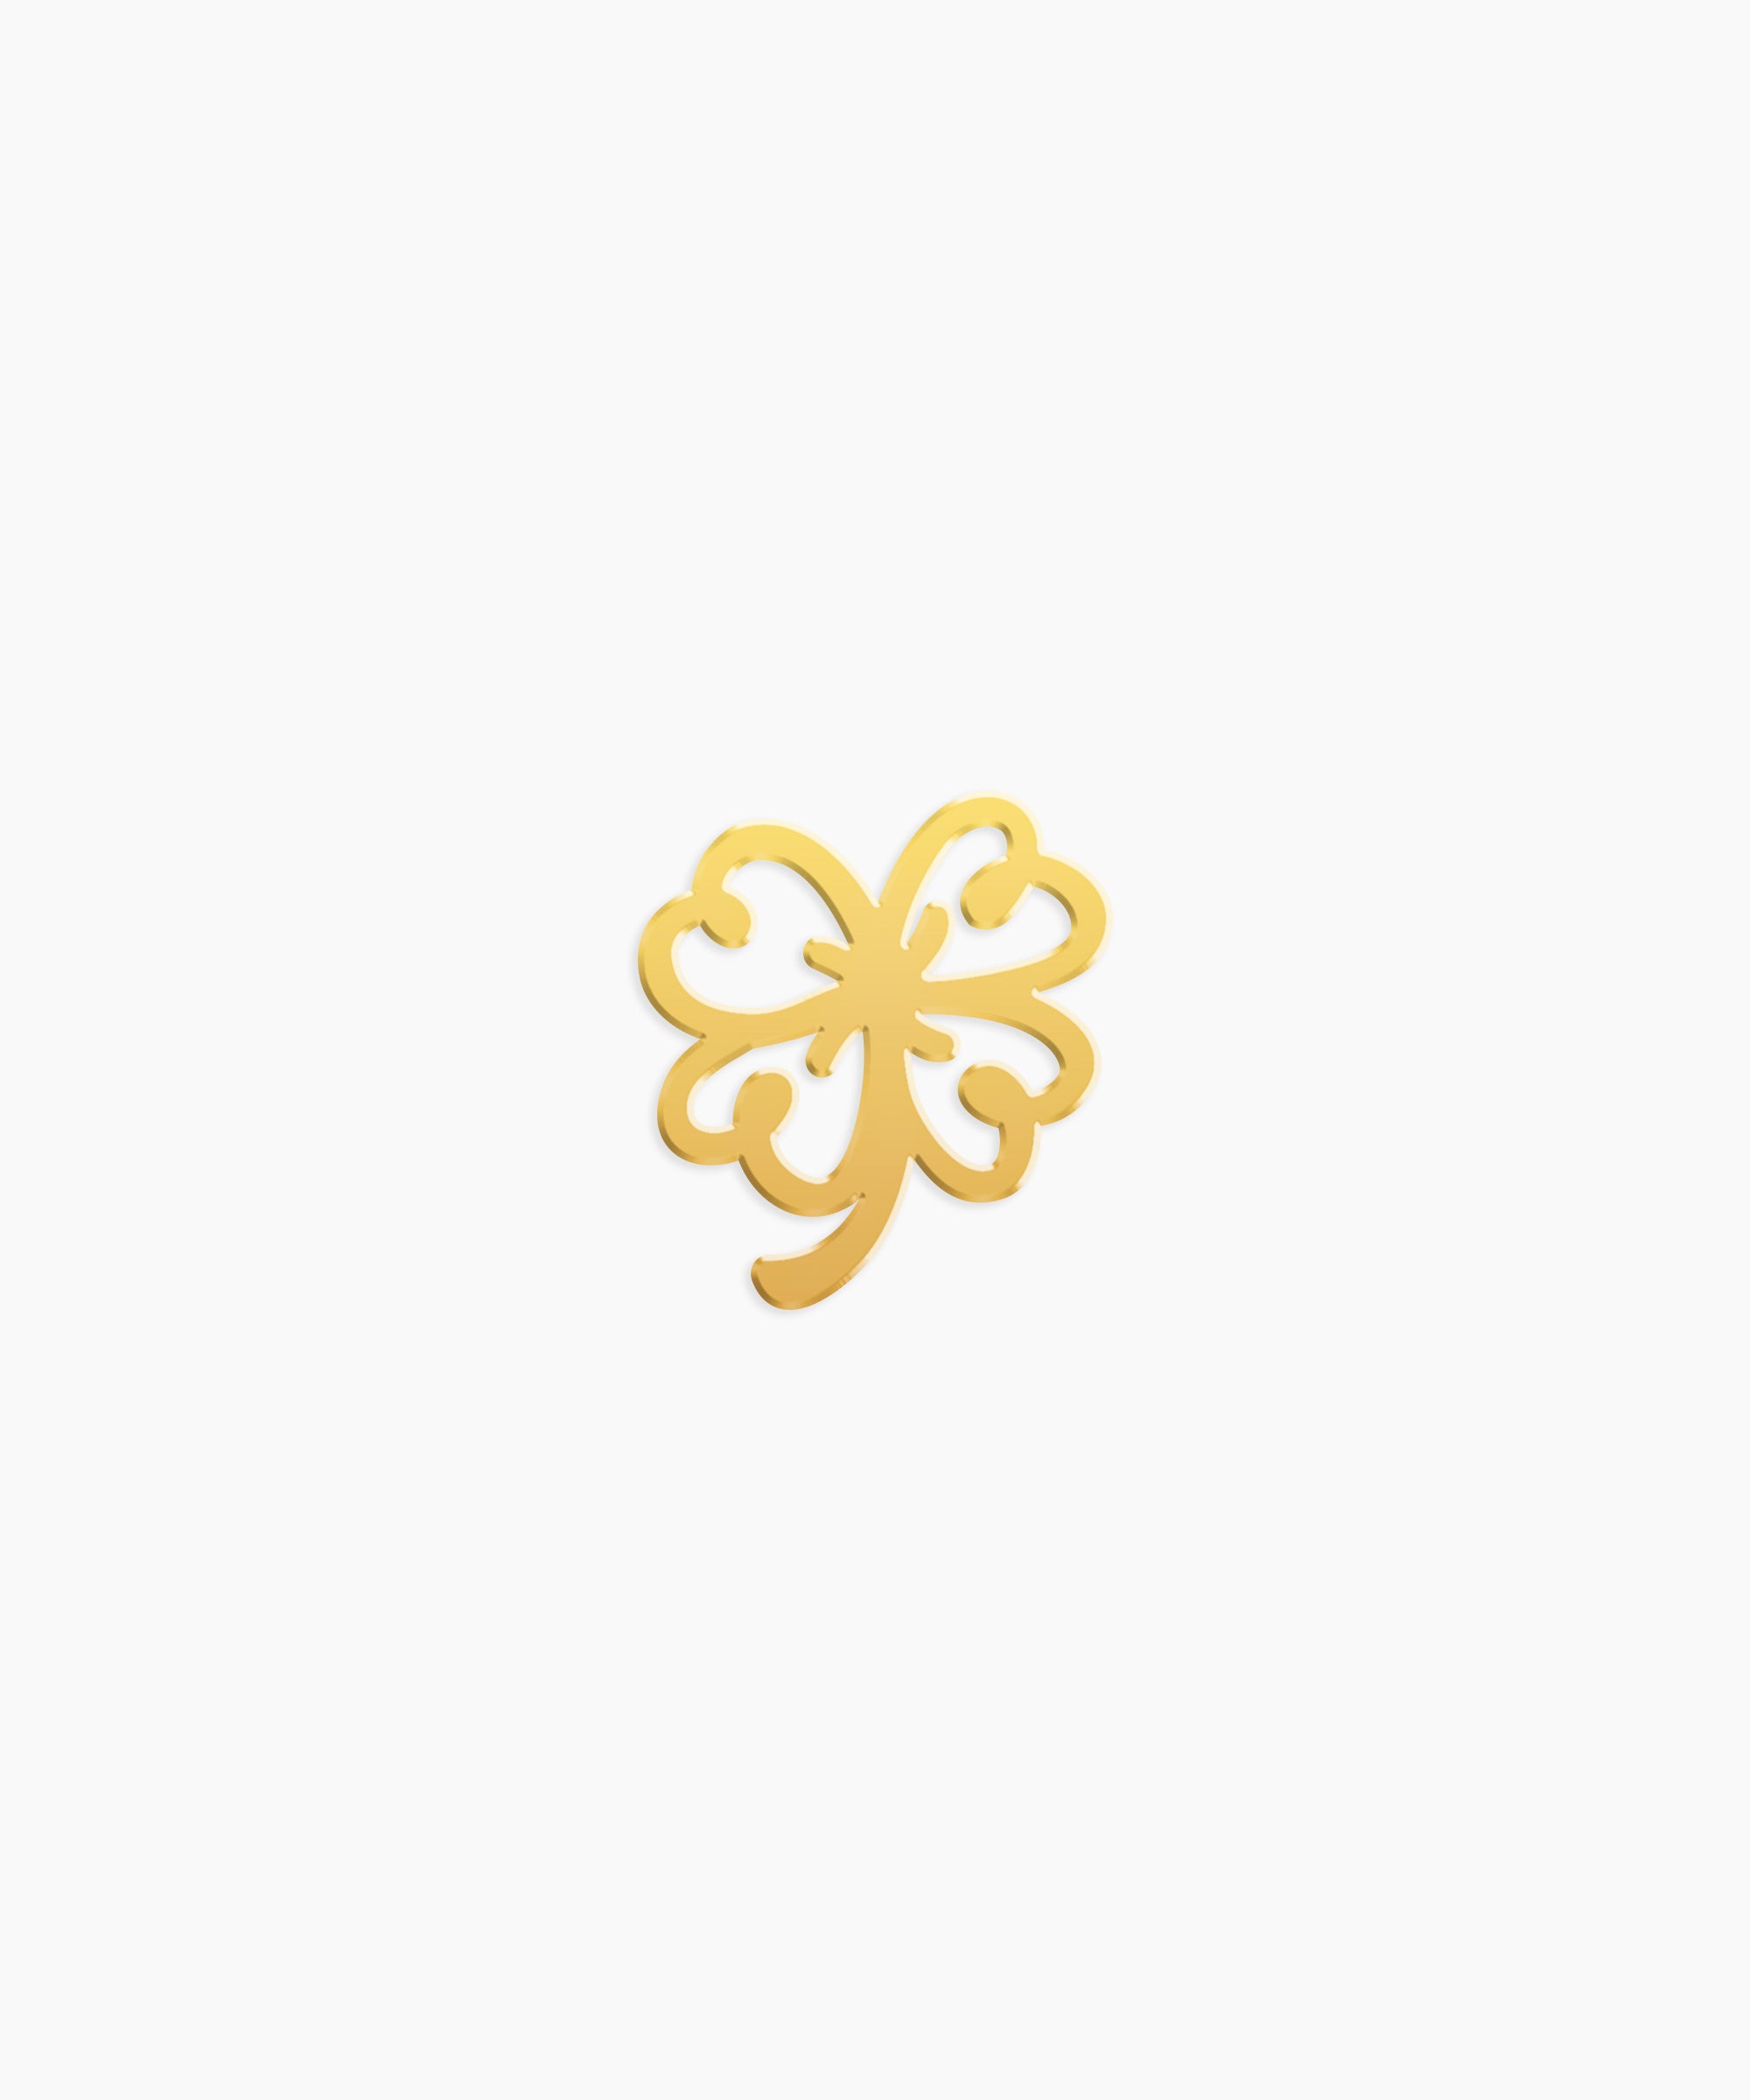 Lucky Clover Charm - High Quality, Affordable, Whimsical, Hand Drawn Individual Charms for a Custom Locket - Available in Gold and Silver - Made in USA - Brevity Jewelry